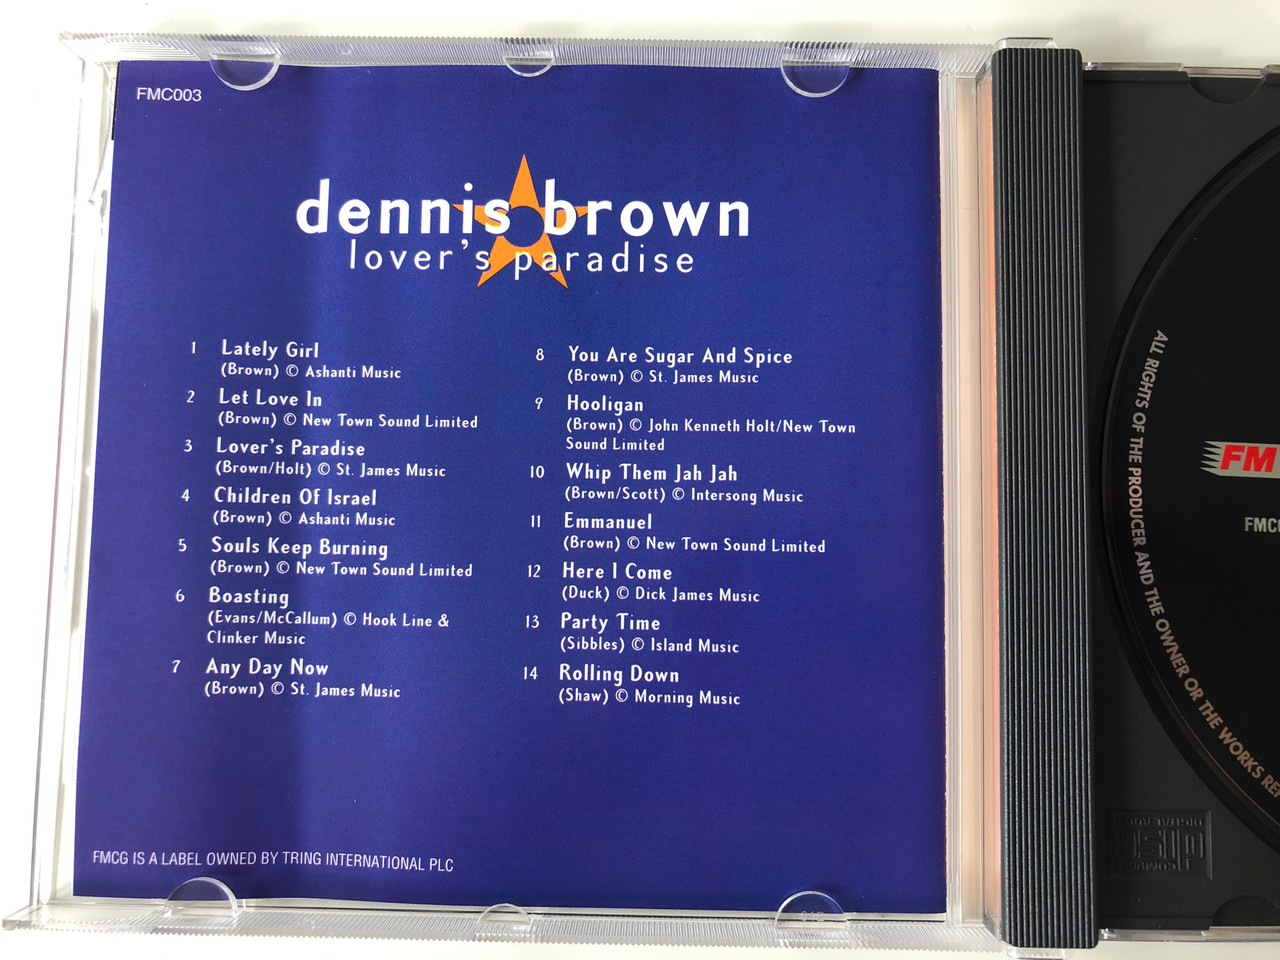 Dennis Brown ‎– Lover's Paradise / Including Lately Girl, Let Love In,  Children Of Israel, Any Day Now and many more / FMCG ‎Audio CD 1997 /  FMC003 - bibleinmylanguage